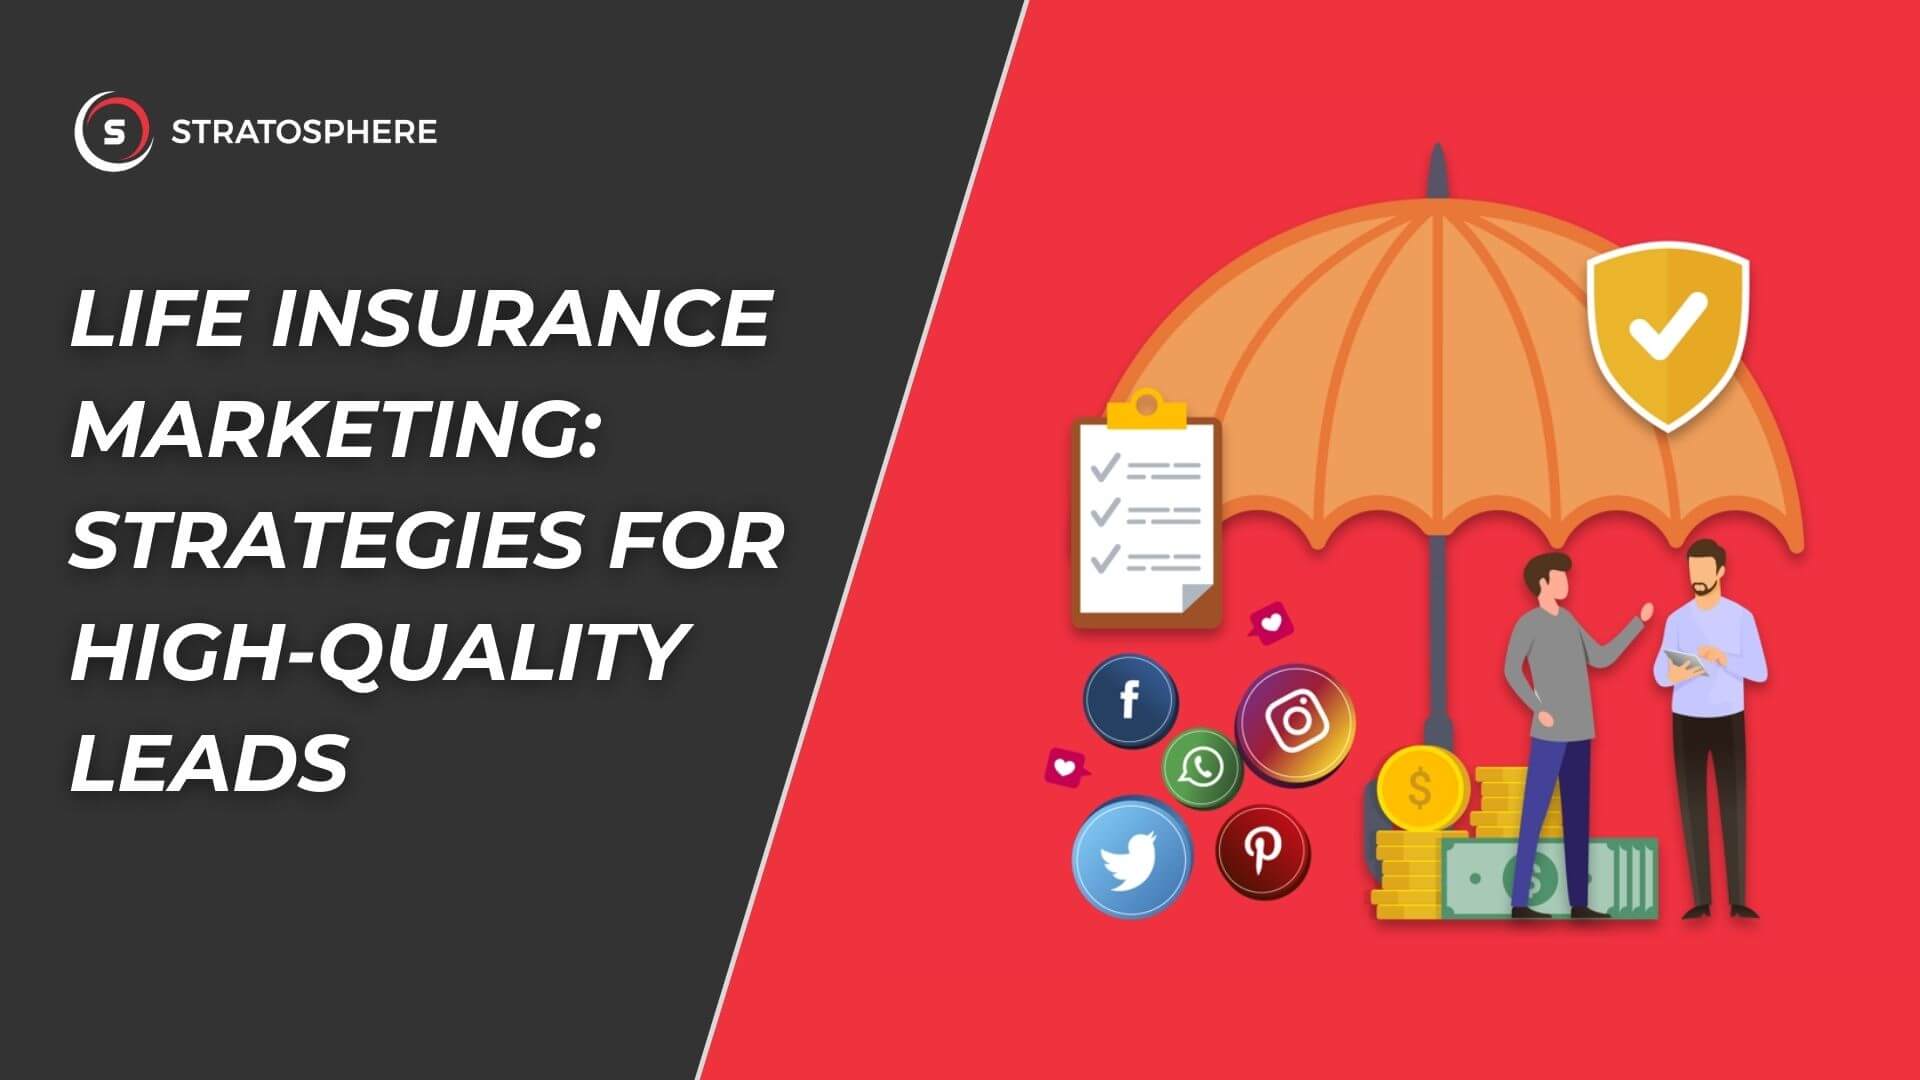 Life Insurance Marketing: Strategies for High-Quality New Leads